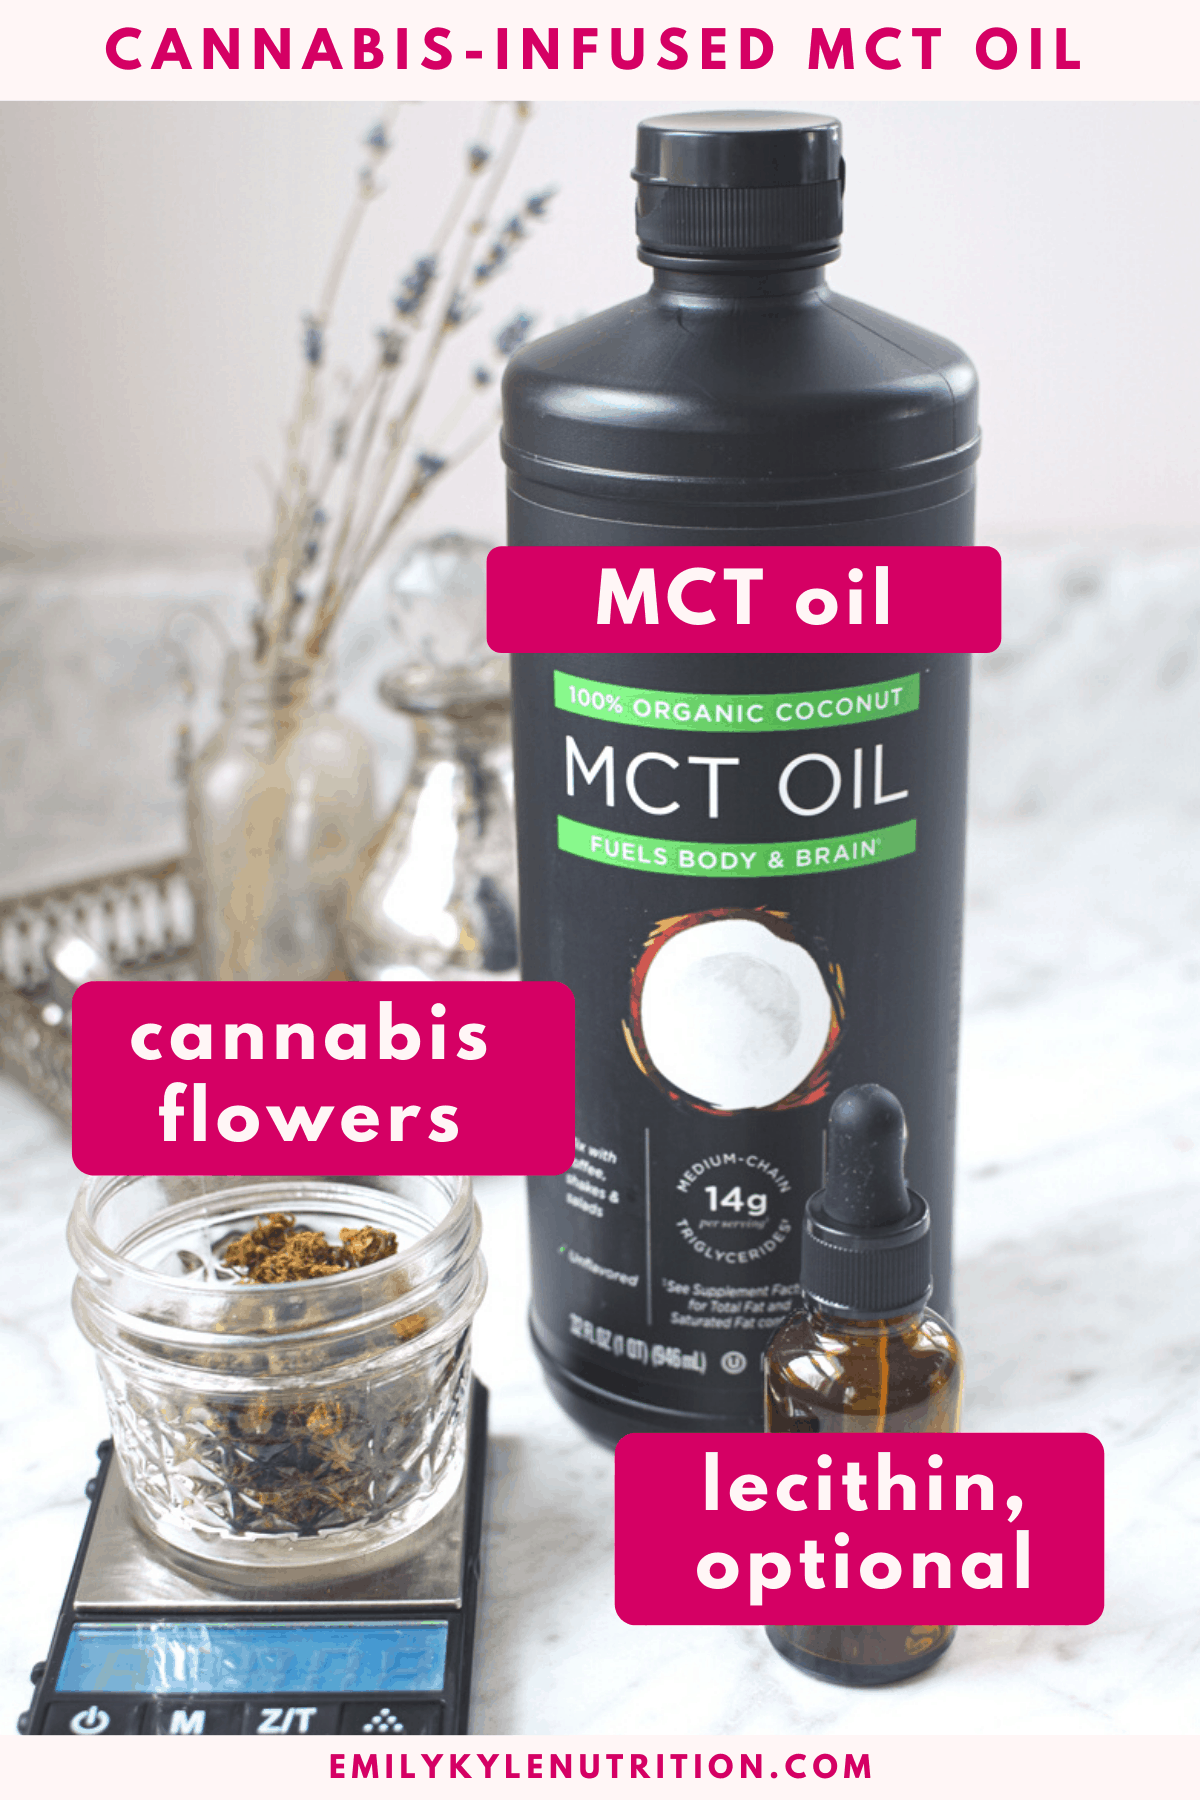 Ingredients collage featuring MCT oil, cannabis flowers, and lecithin